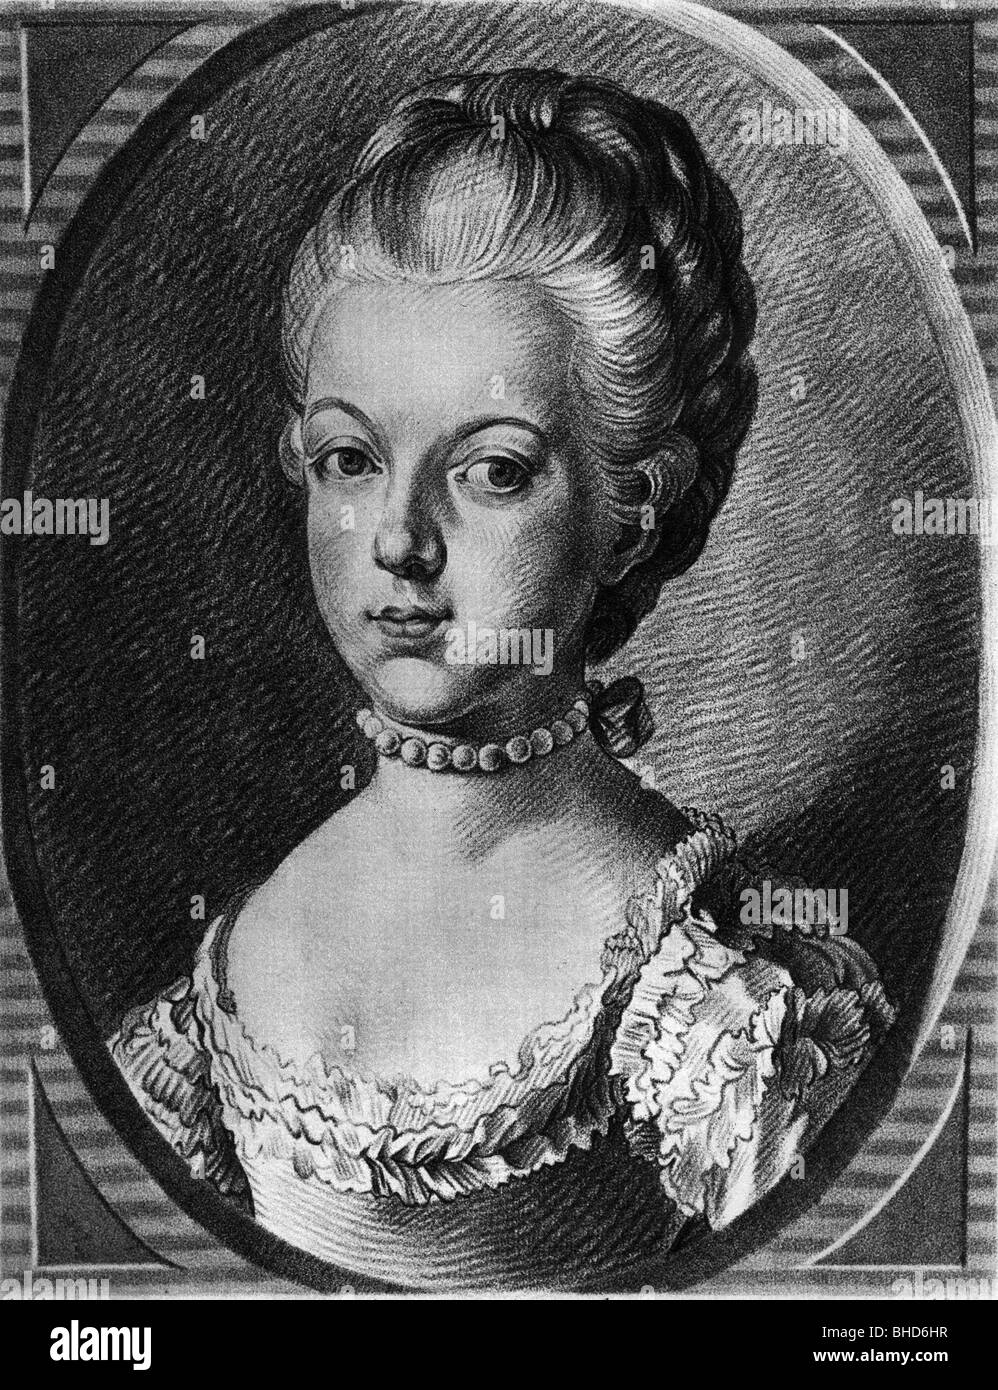 Marie Antoinette, 2.11.1755 - 16.10.1793, Queen Consort of France 1774 - 1792, rotogravure, after engraving by Bonnet, portrait, Stock Photo